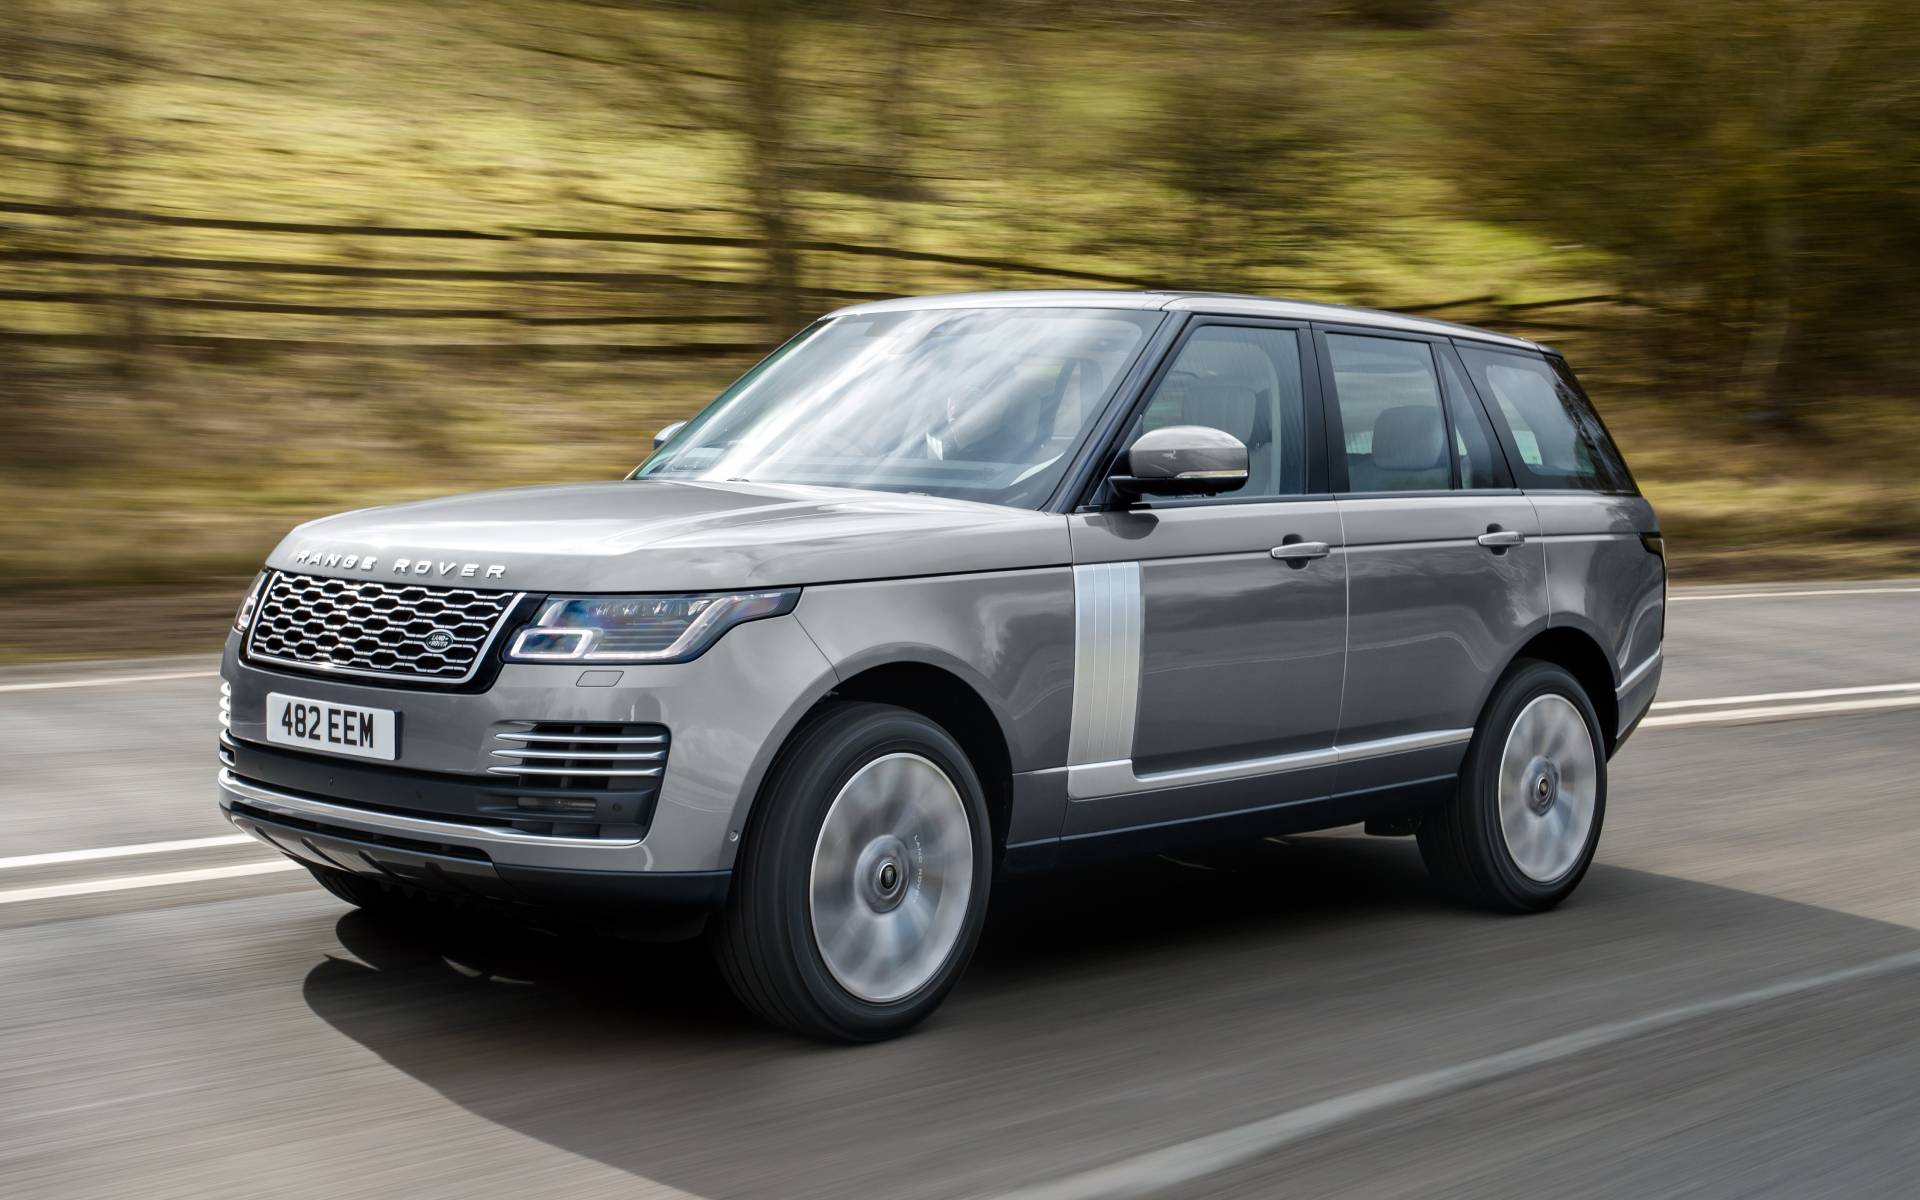 Range Rover Lwb Hybrid Autobiography  : But Not Just Any Range Rover Will Do.